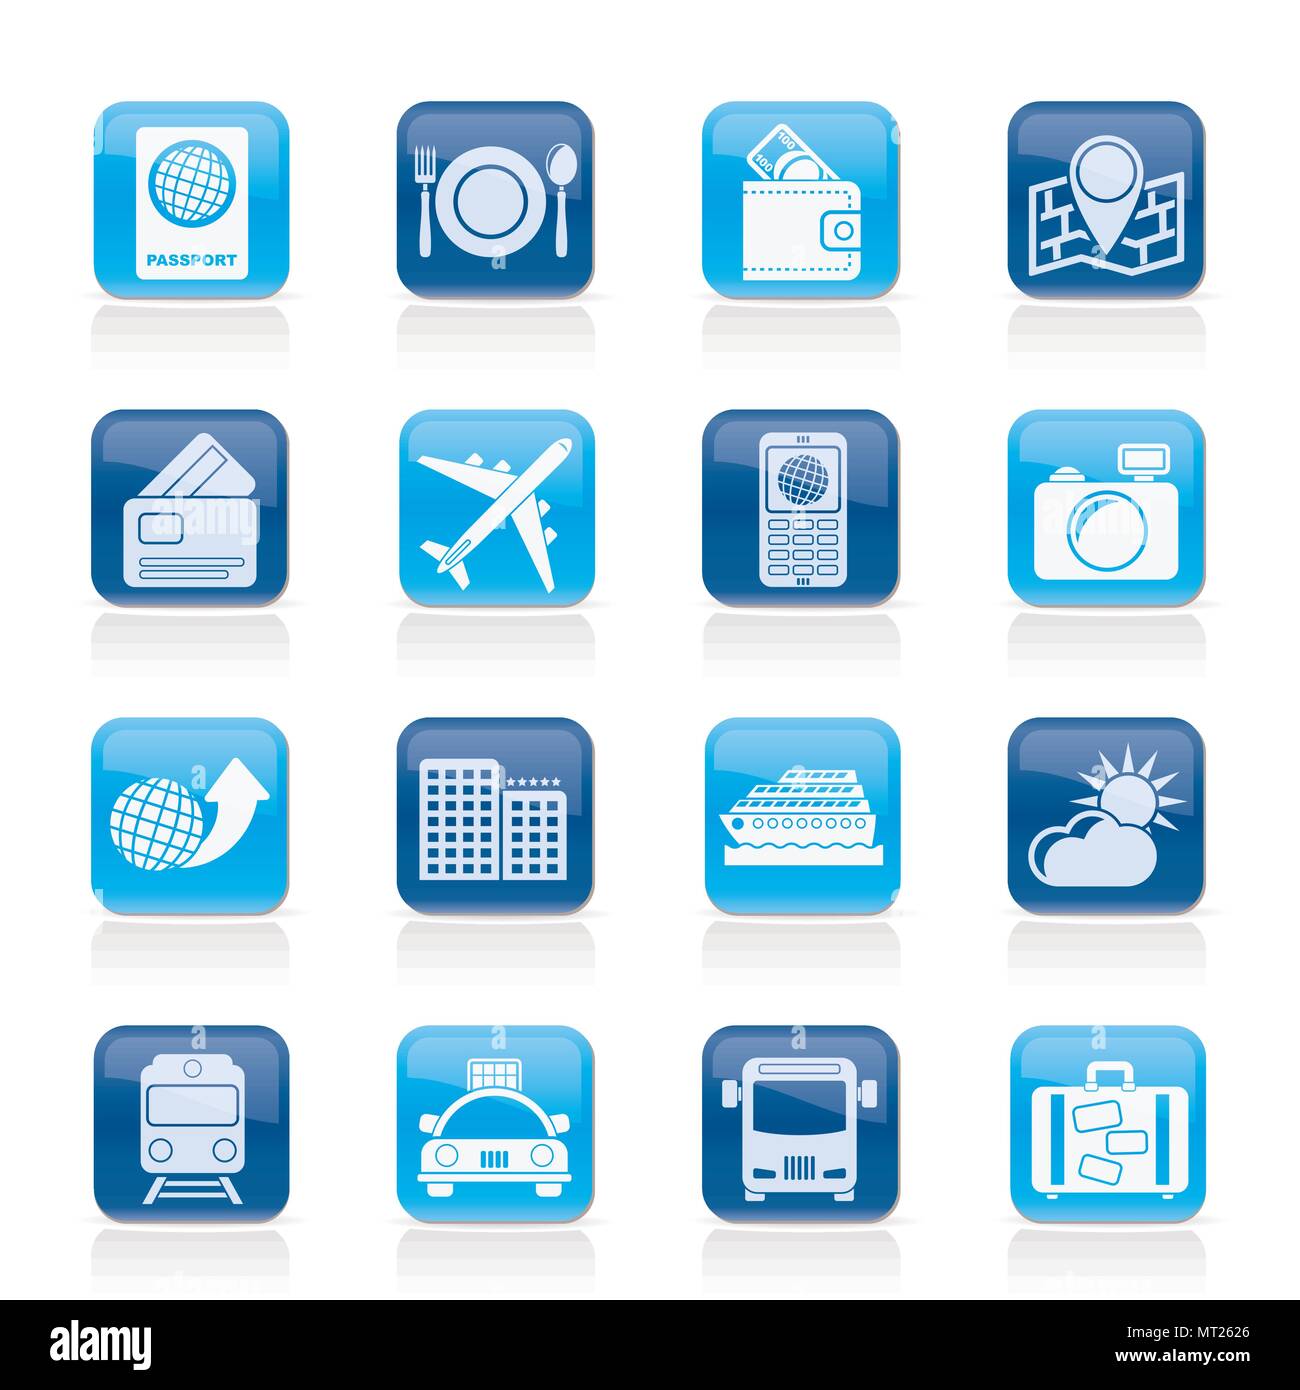 Travel, transportation and vacation icons - vector icon set Stock Vector